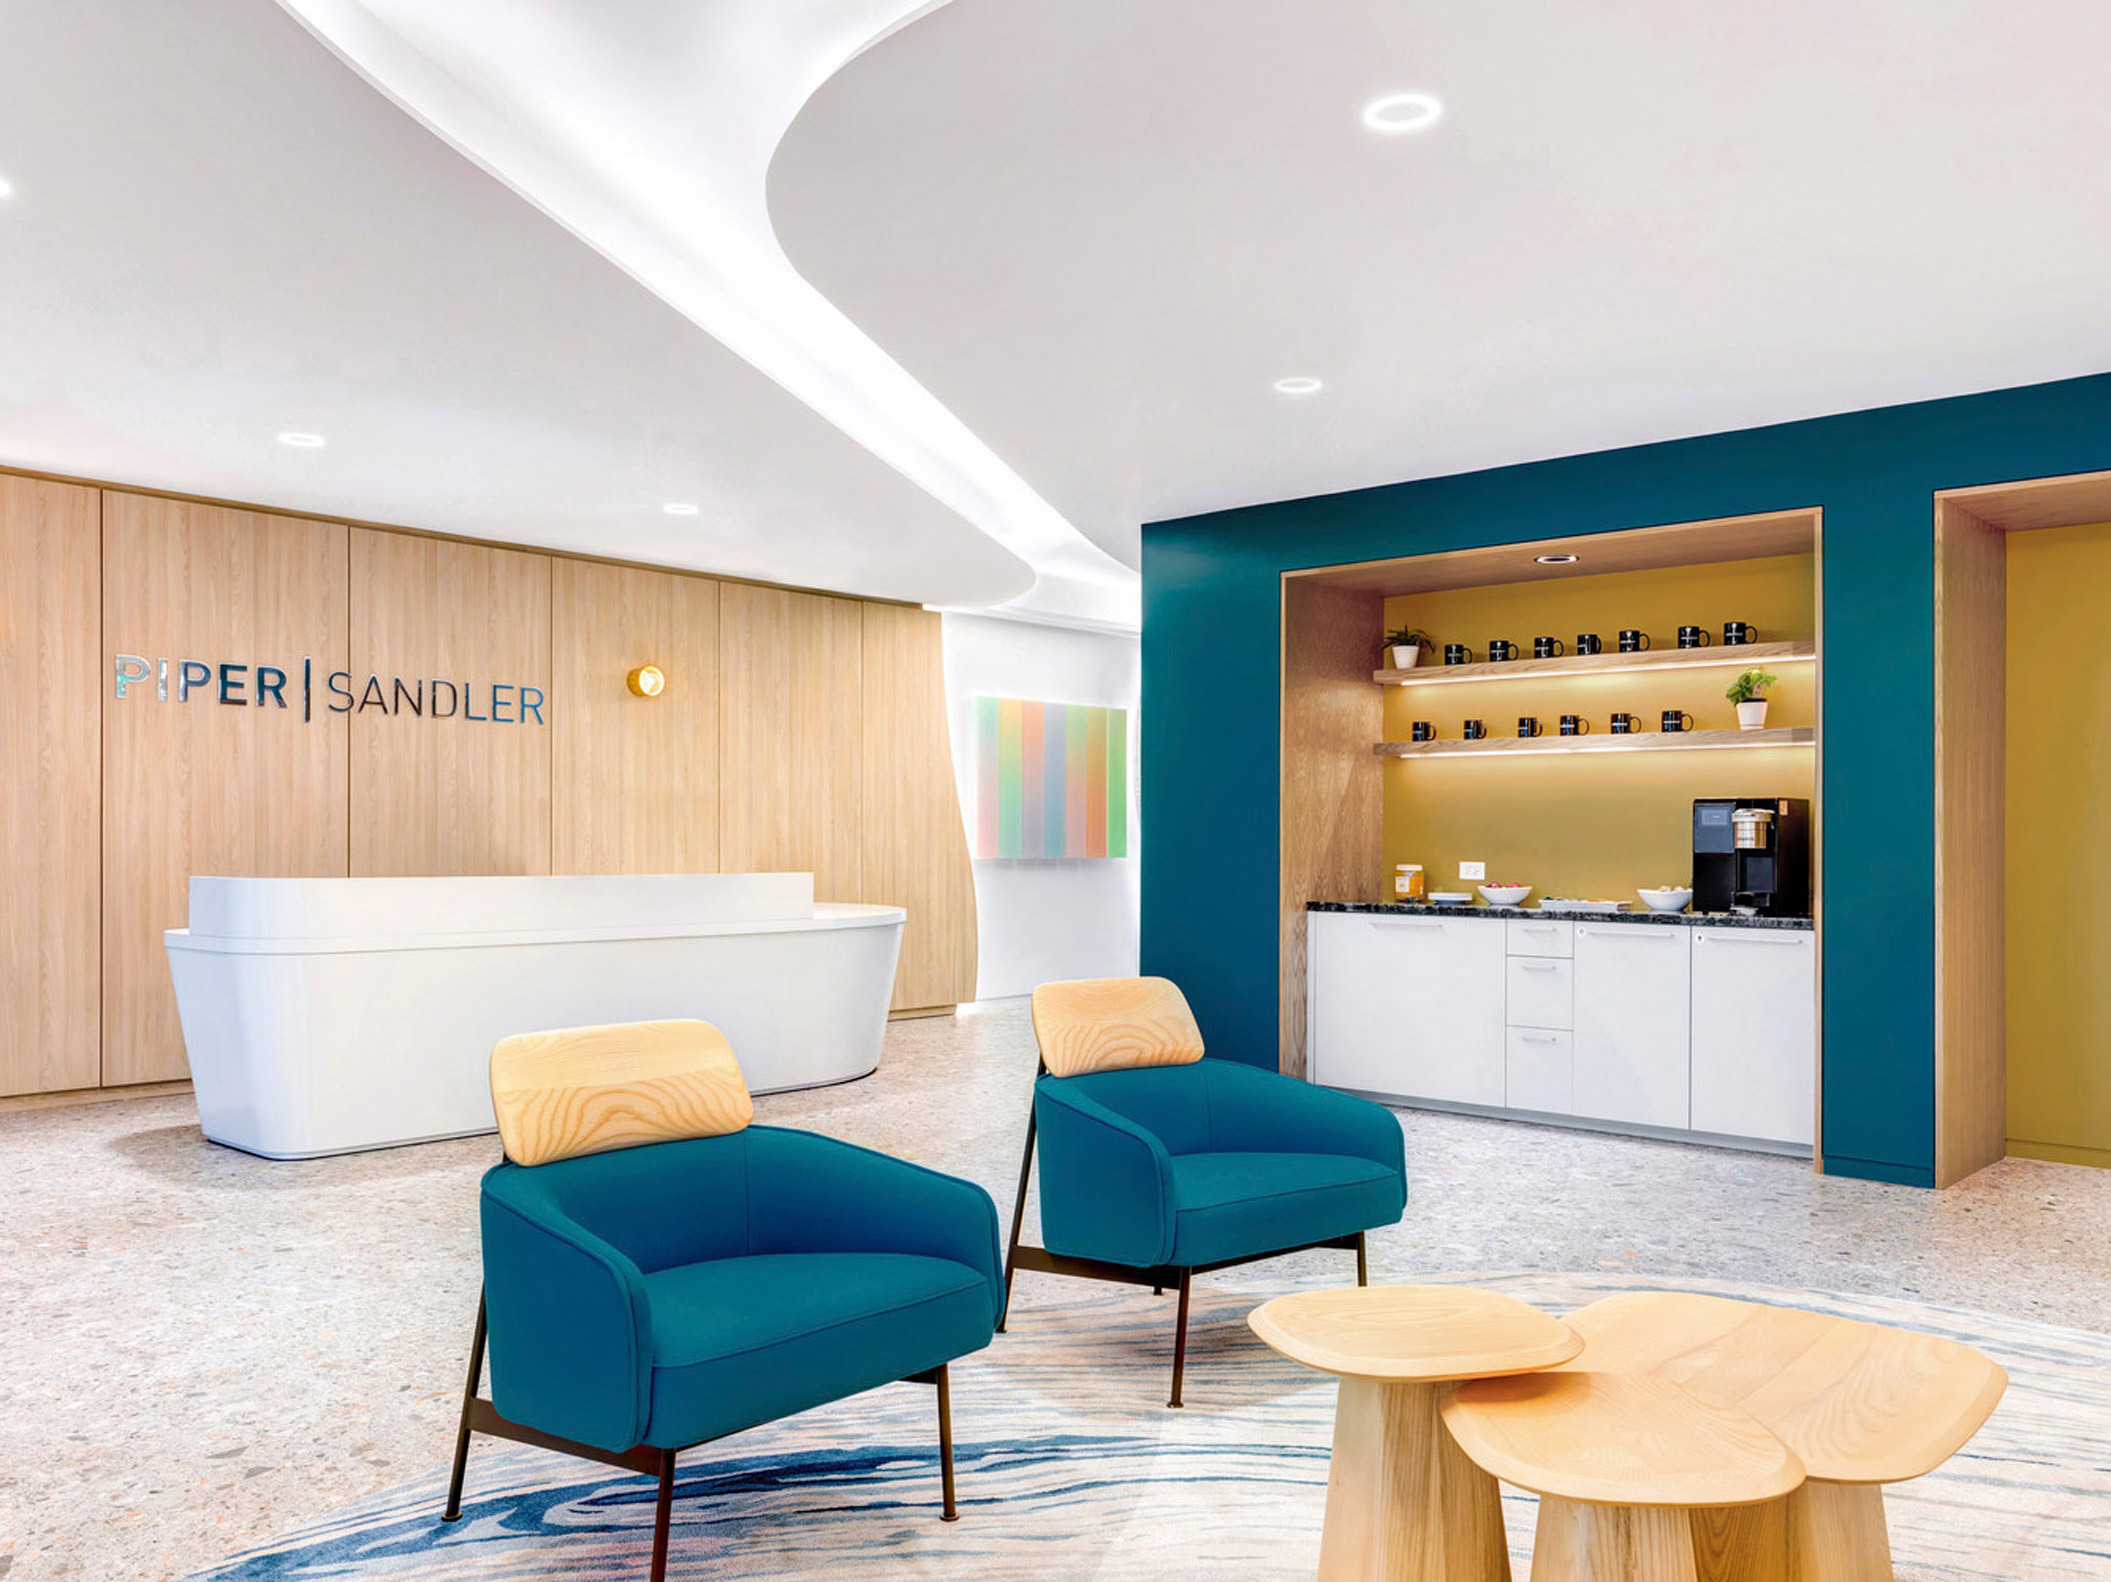 Modern reception area with curved white desk, accented by teal armchairs and wooden stools. A blue alcove with shelving hosts refreshments, set against a warm wooden backdrop with the company’s signage. Ambient lighting complements the room's clean, inviting aesthetic.